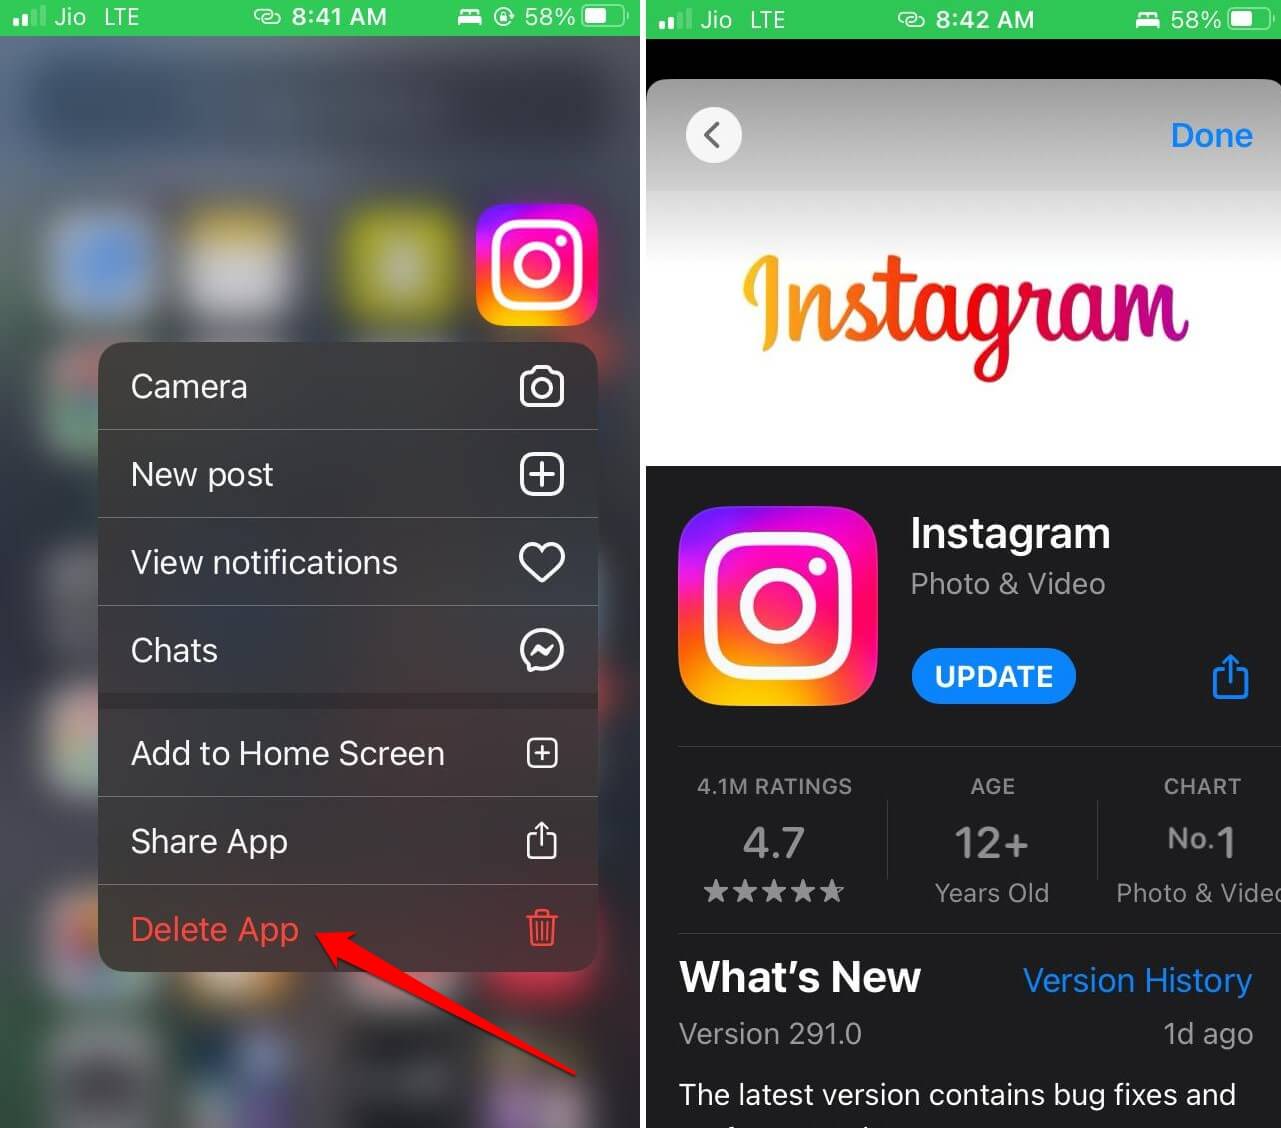 uninstall Instagram on iPhone and reinstall